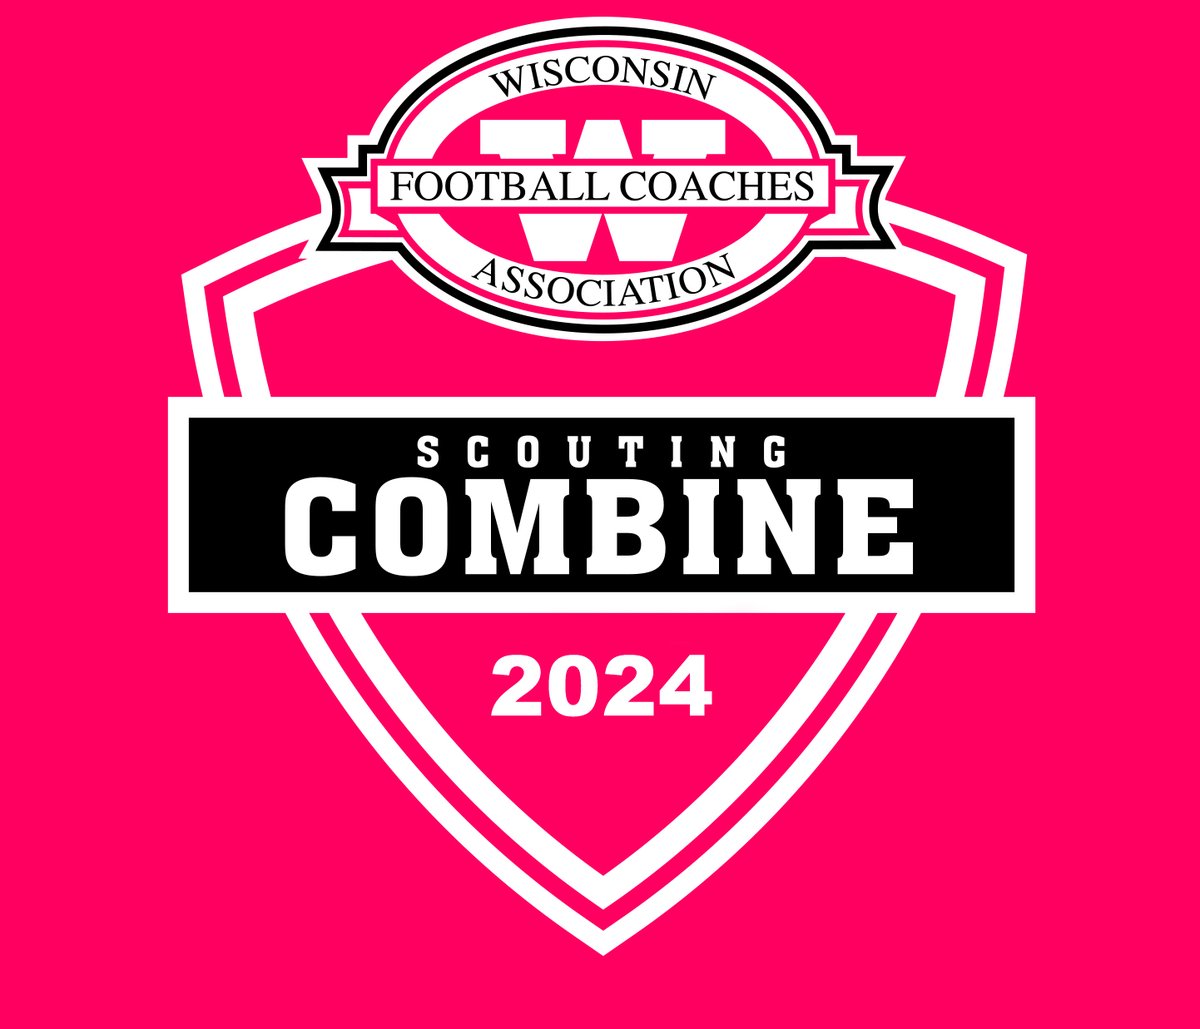 Registration for the WFCA Combine will close on Friday at 10 am. Get registered today to reserve your spot. epochrecruitingwi.sportngin.com/register/form/… #wisfb